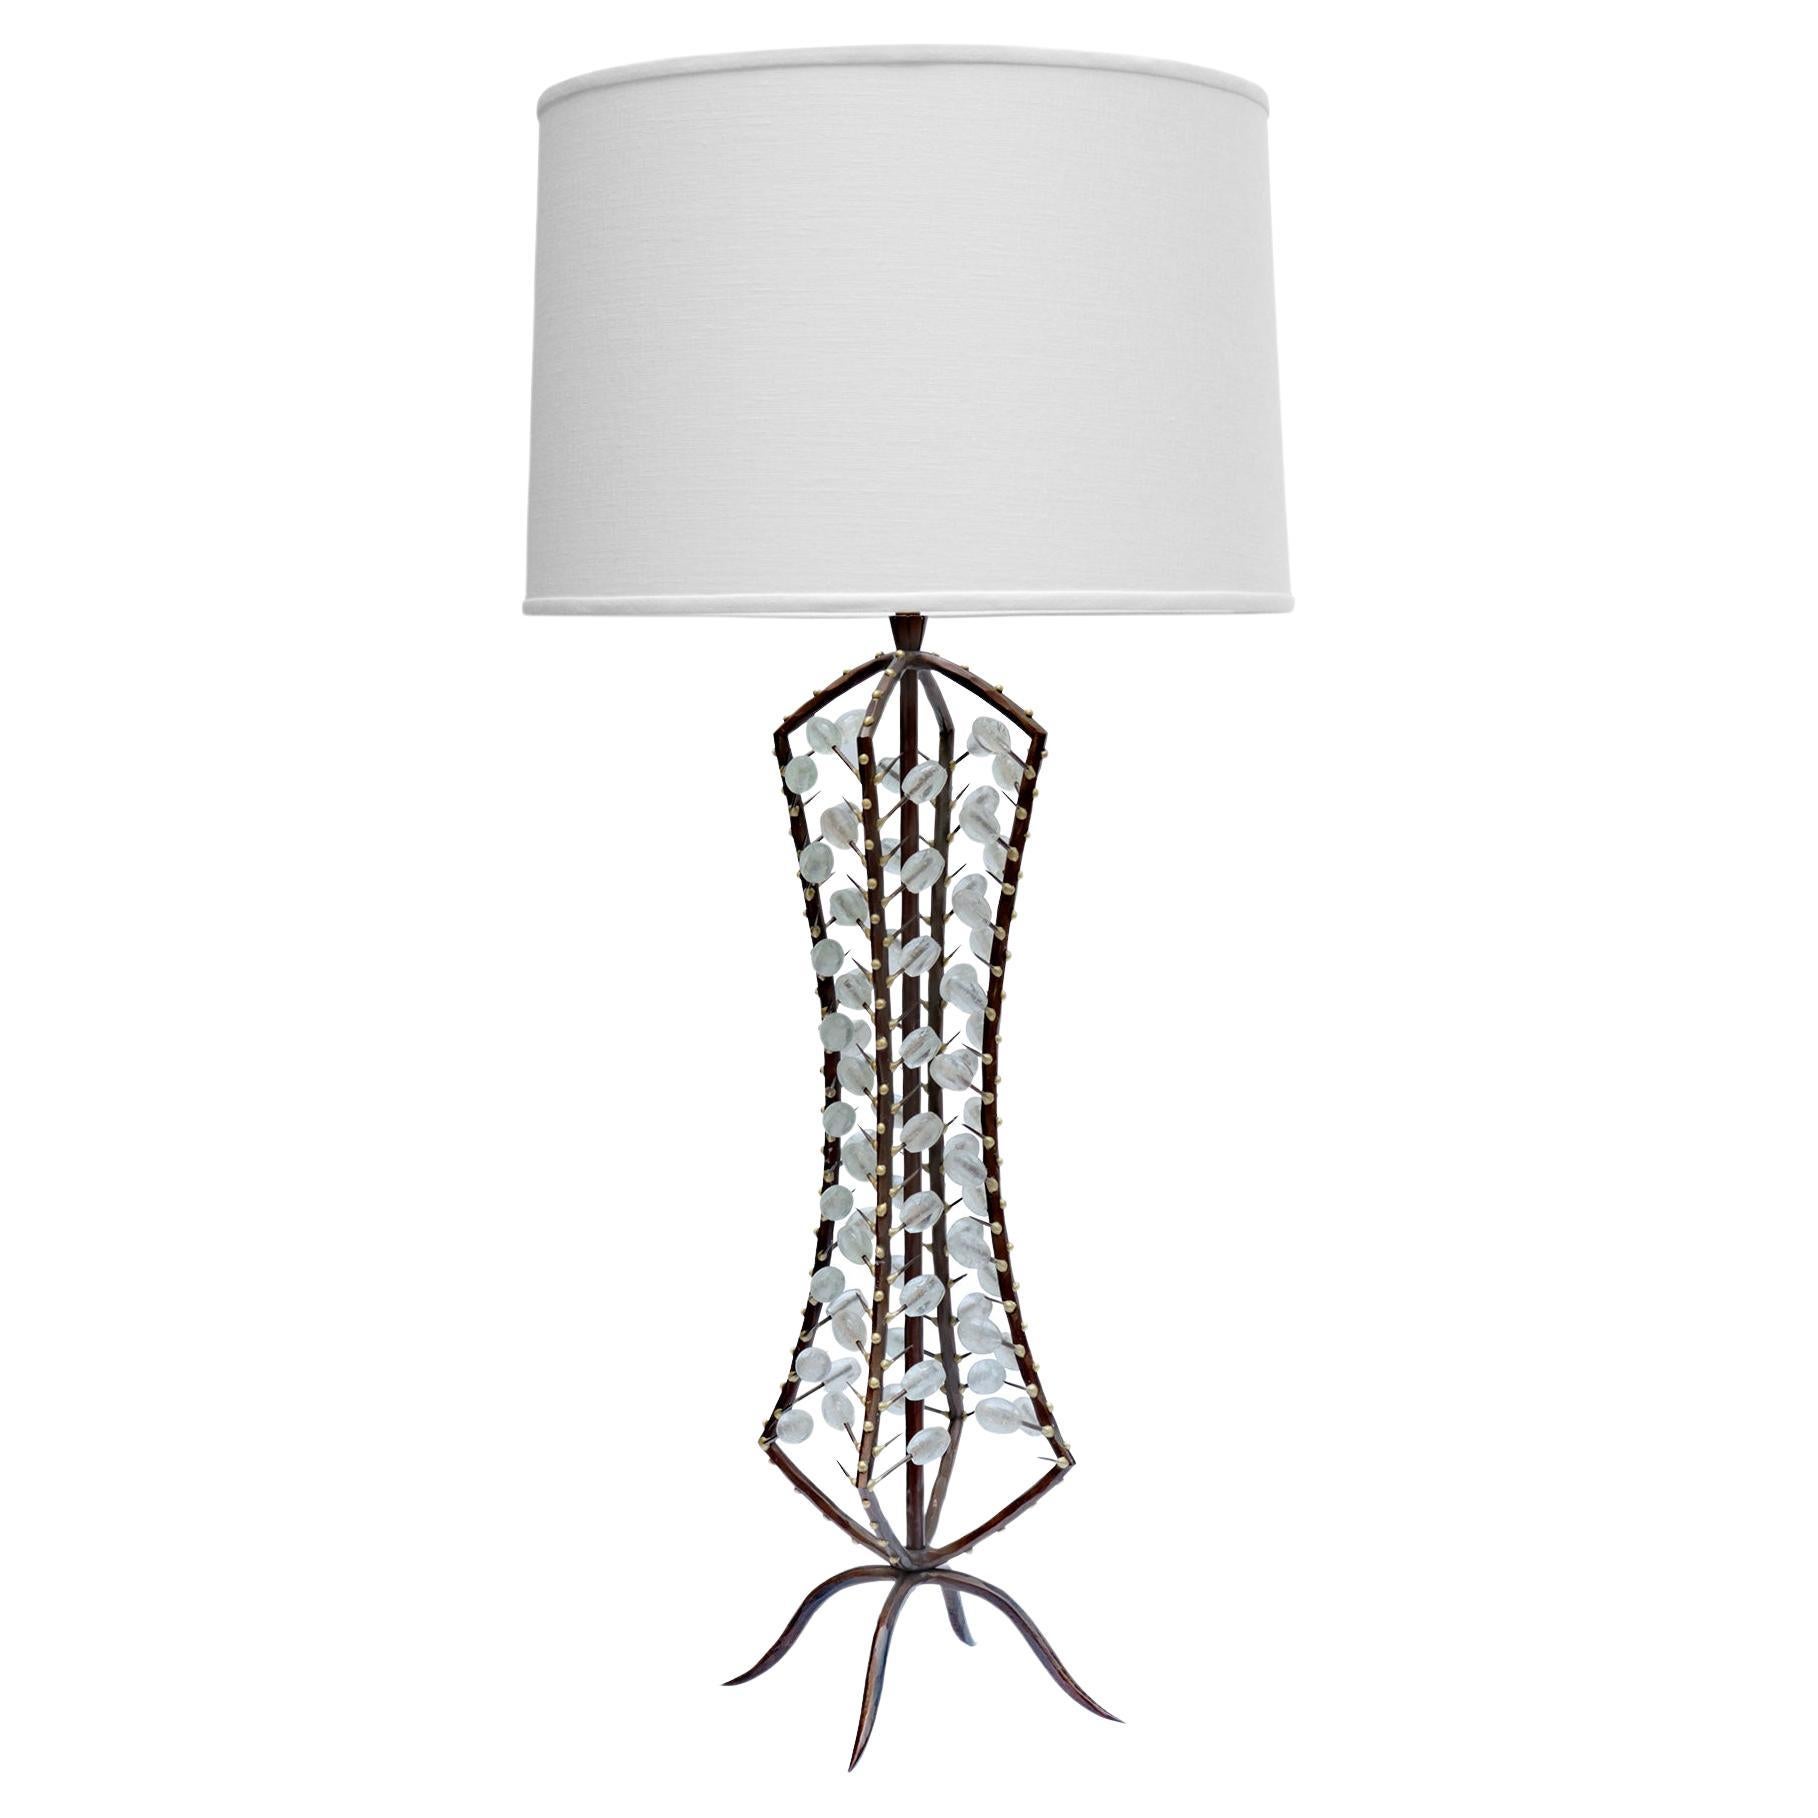 Fine André Dubreuil Table Lamp For Sale